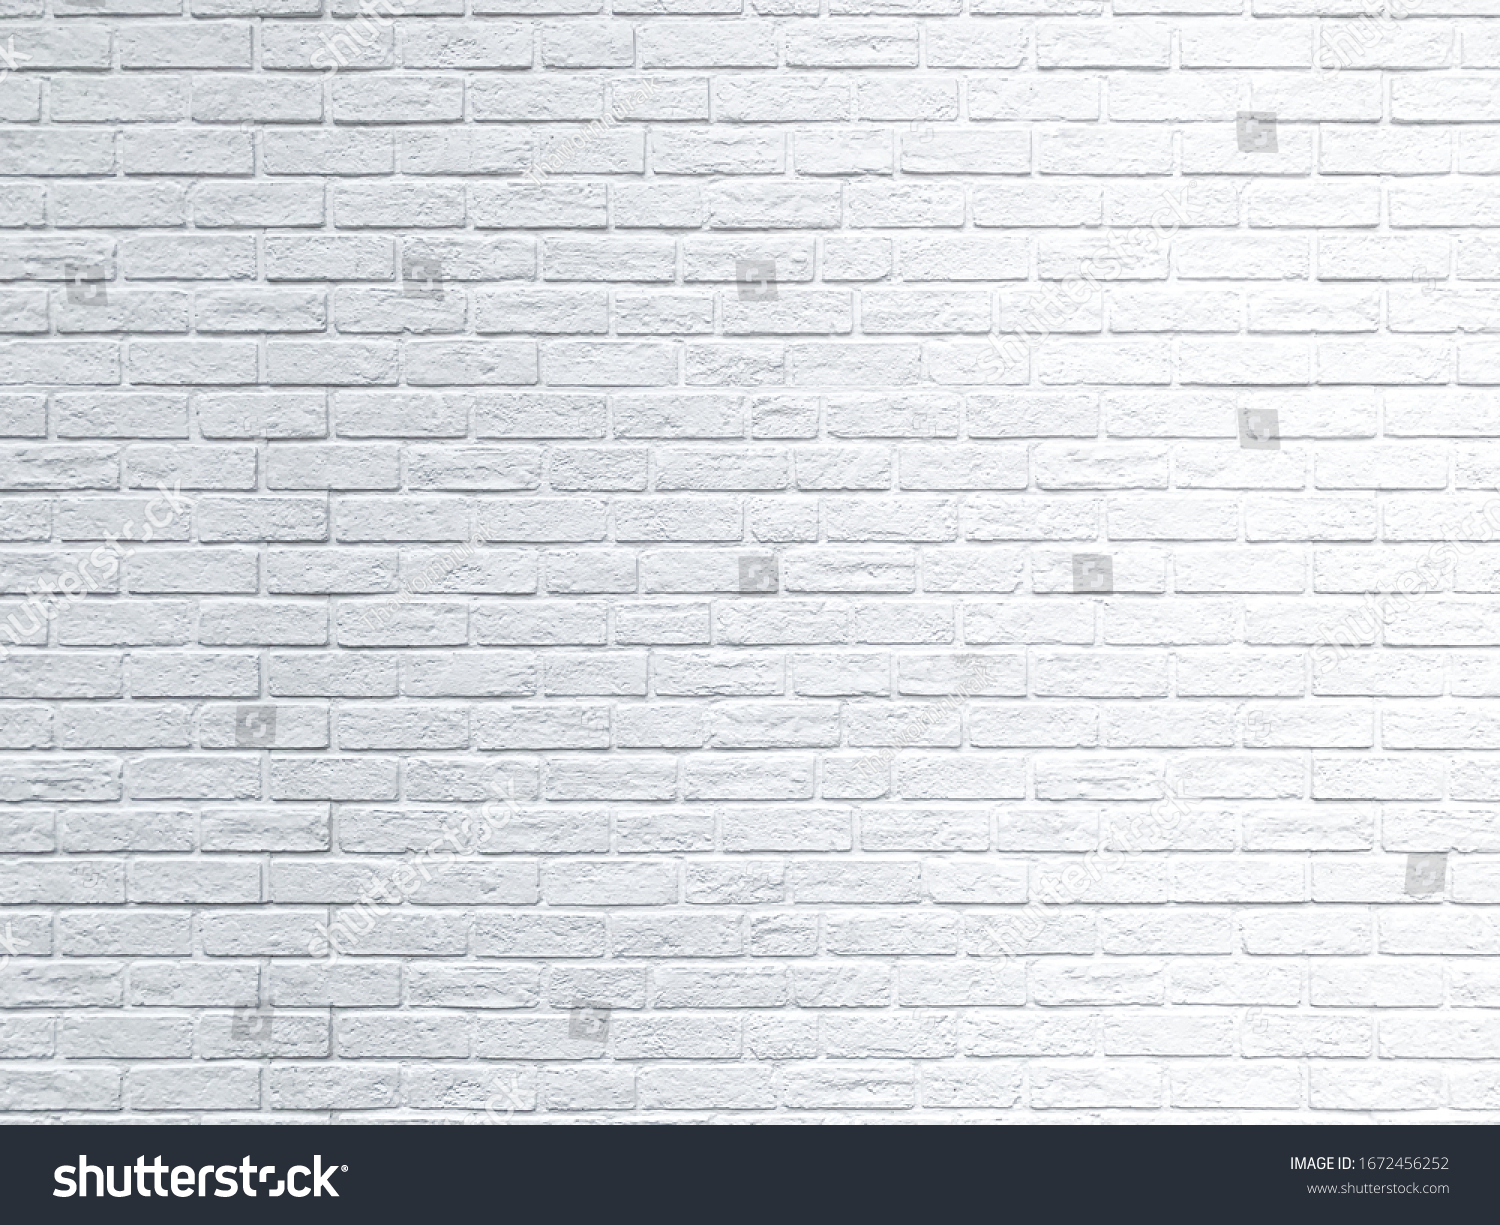 Close up rustic white brick wall texture background #1672456252